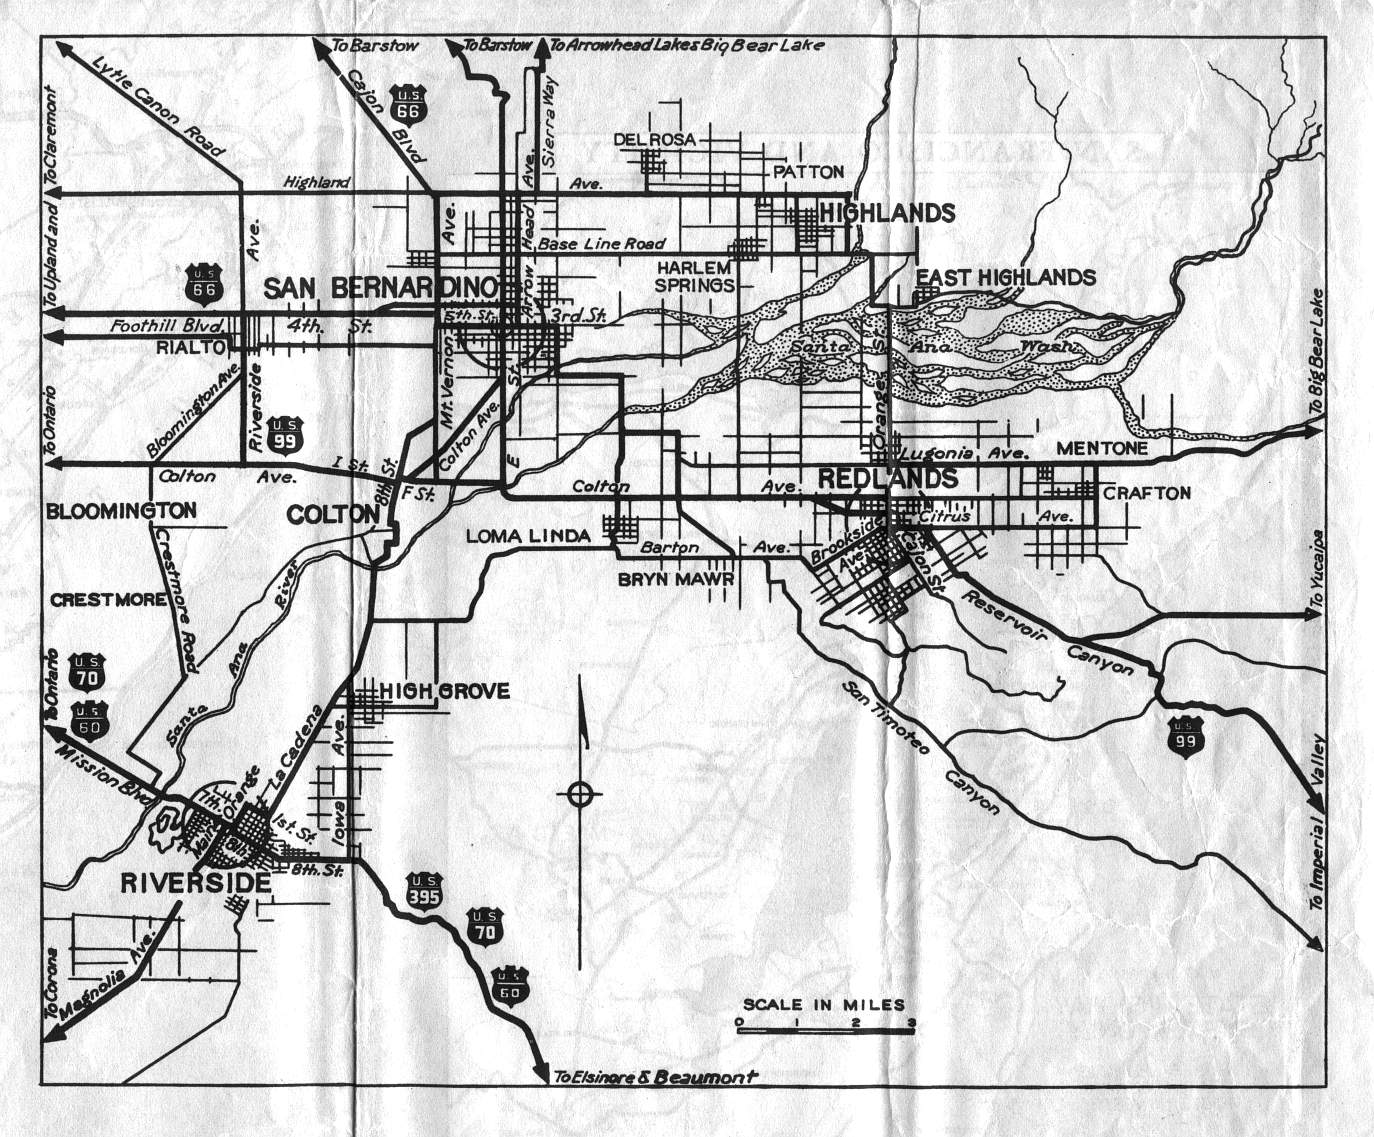 Detail map for San Bernardino on the 1936 California official highway map